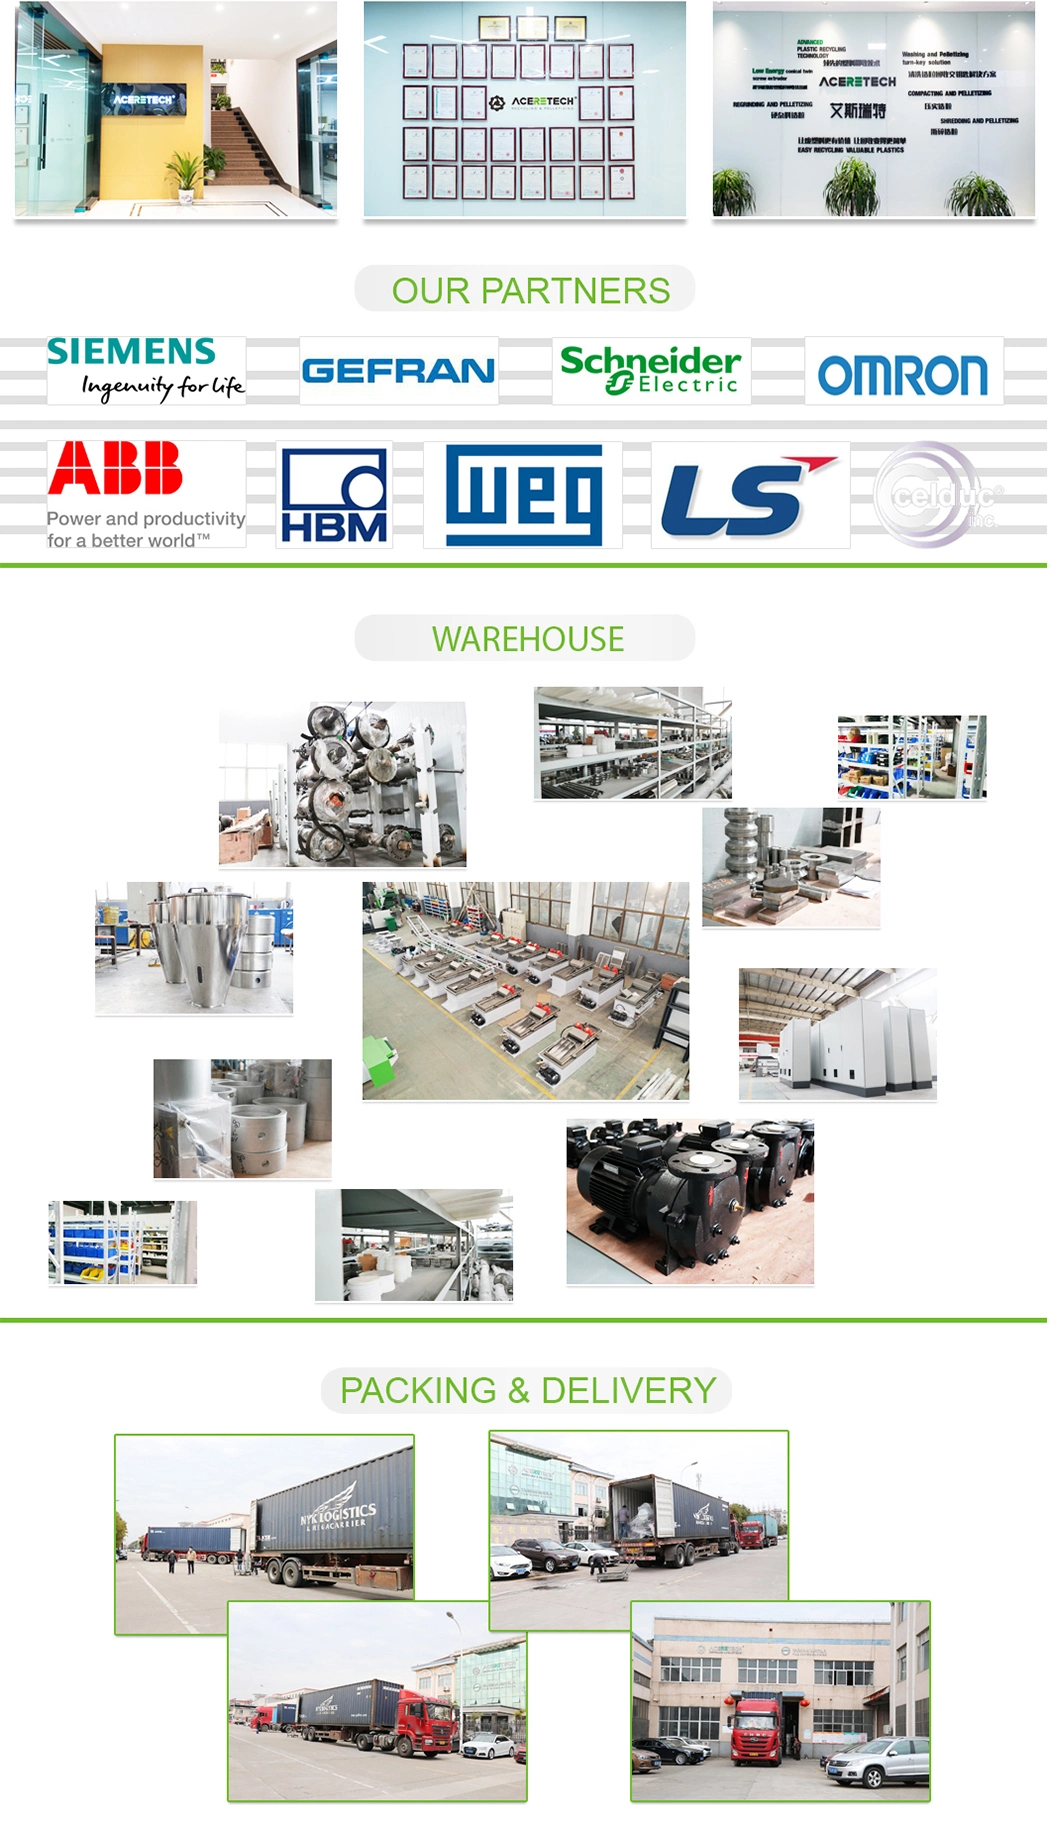 Cm-ABA-5555-1500 China Factory Extrusion Blown Film Extrusion Line Plant